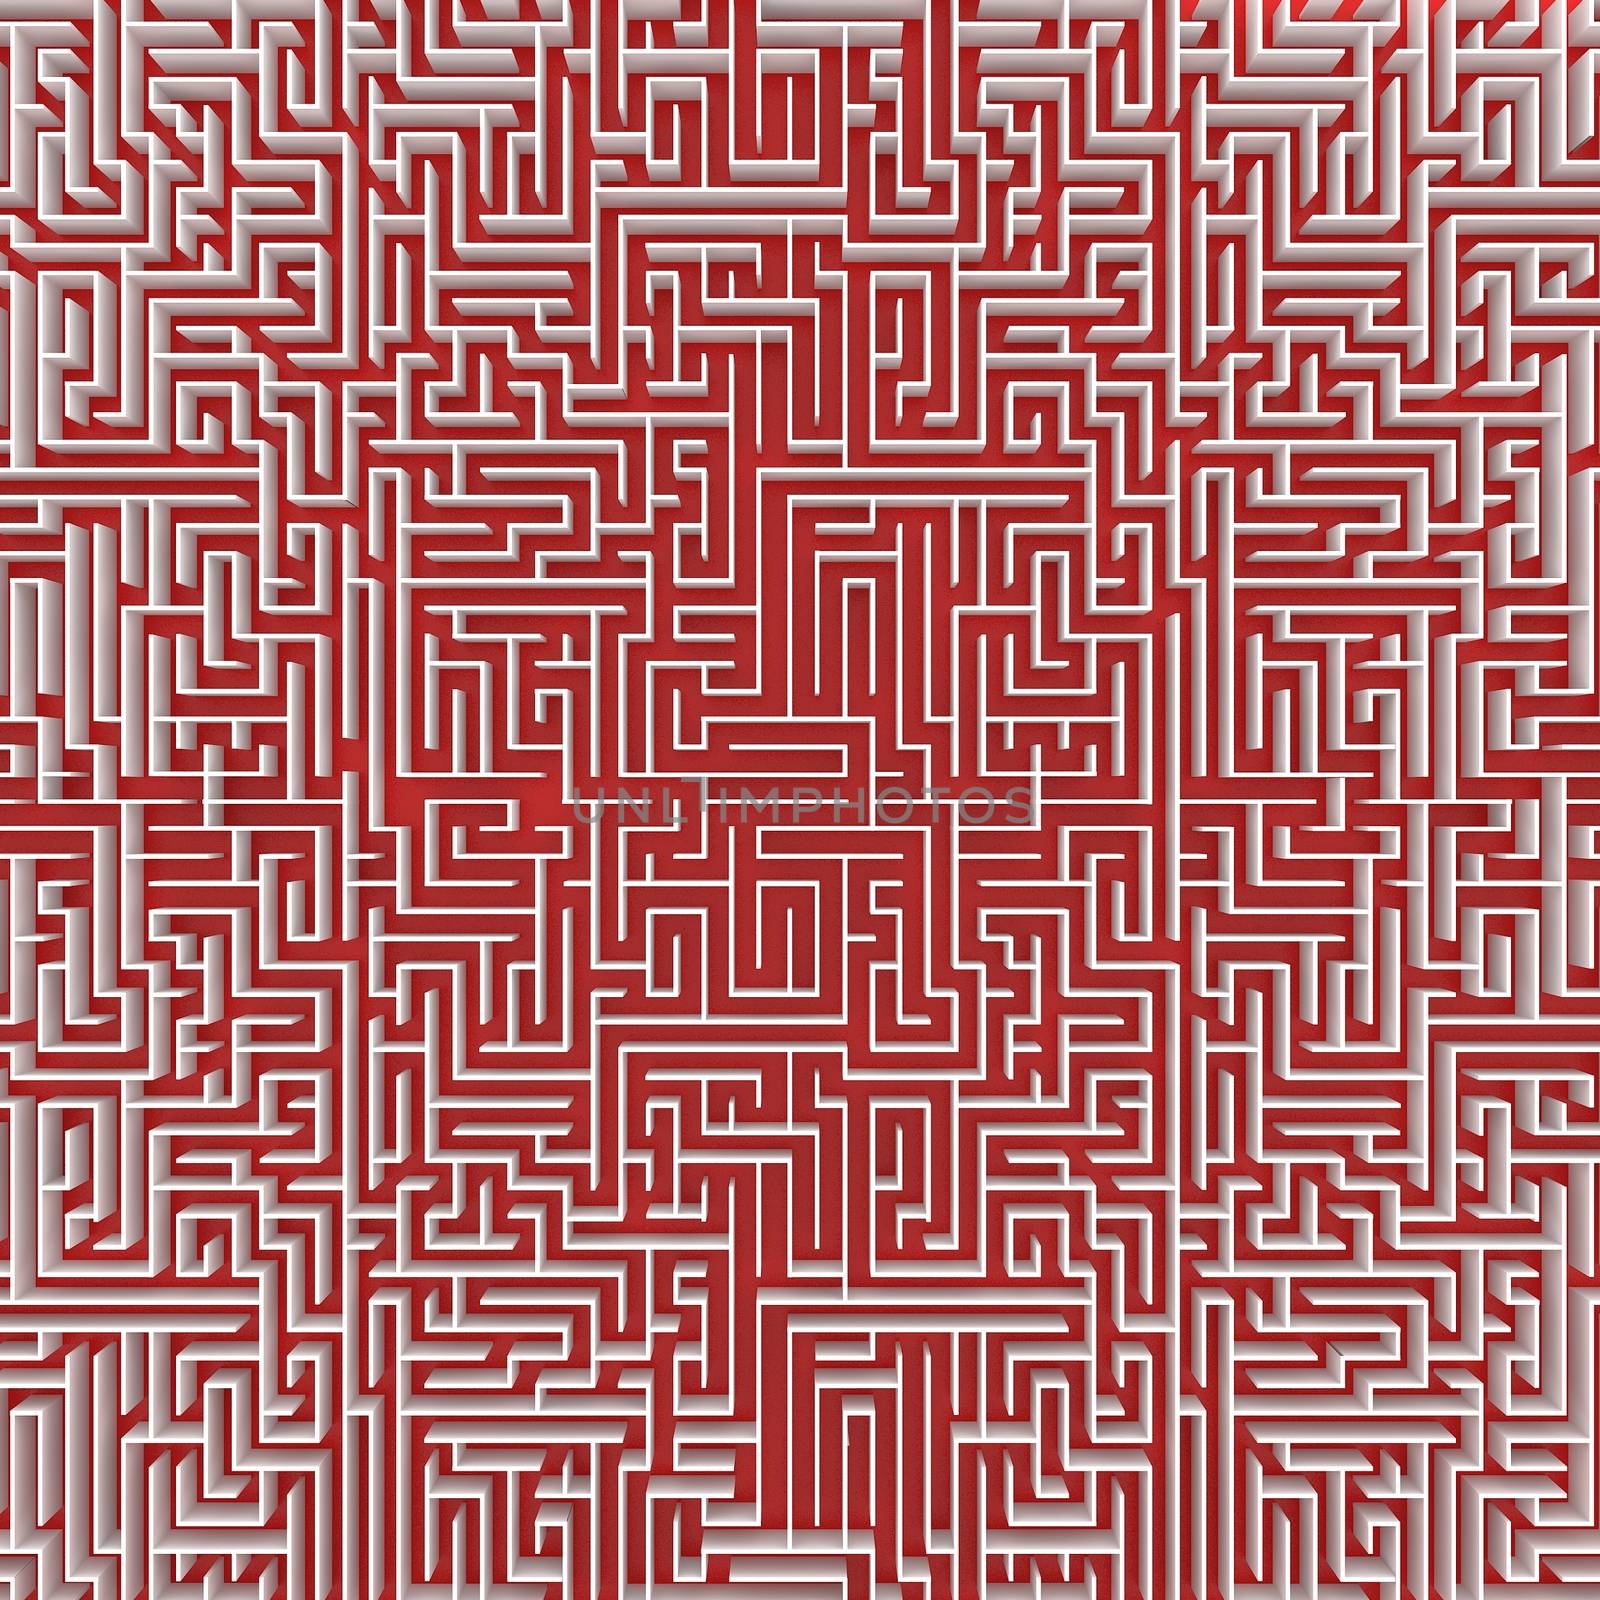 top view of endless maze 3d illustration